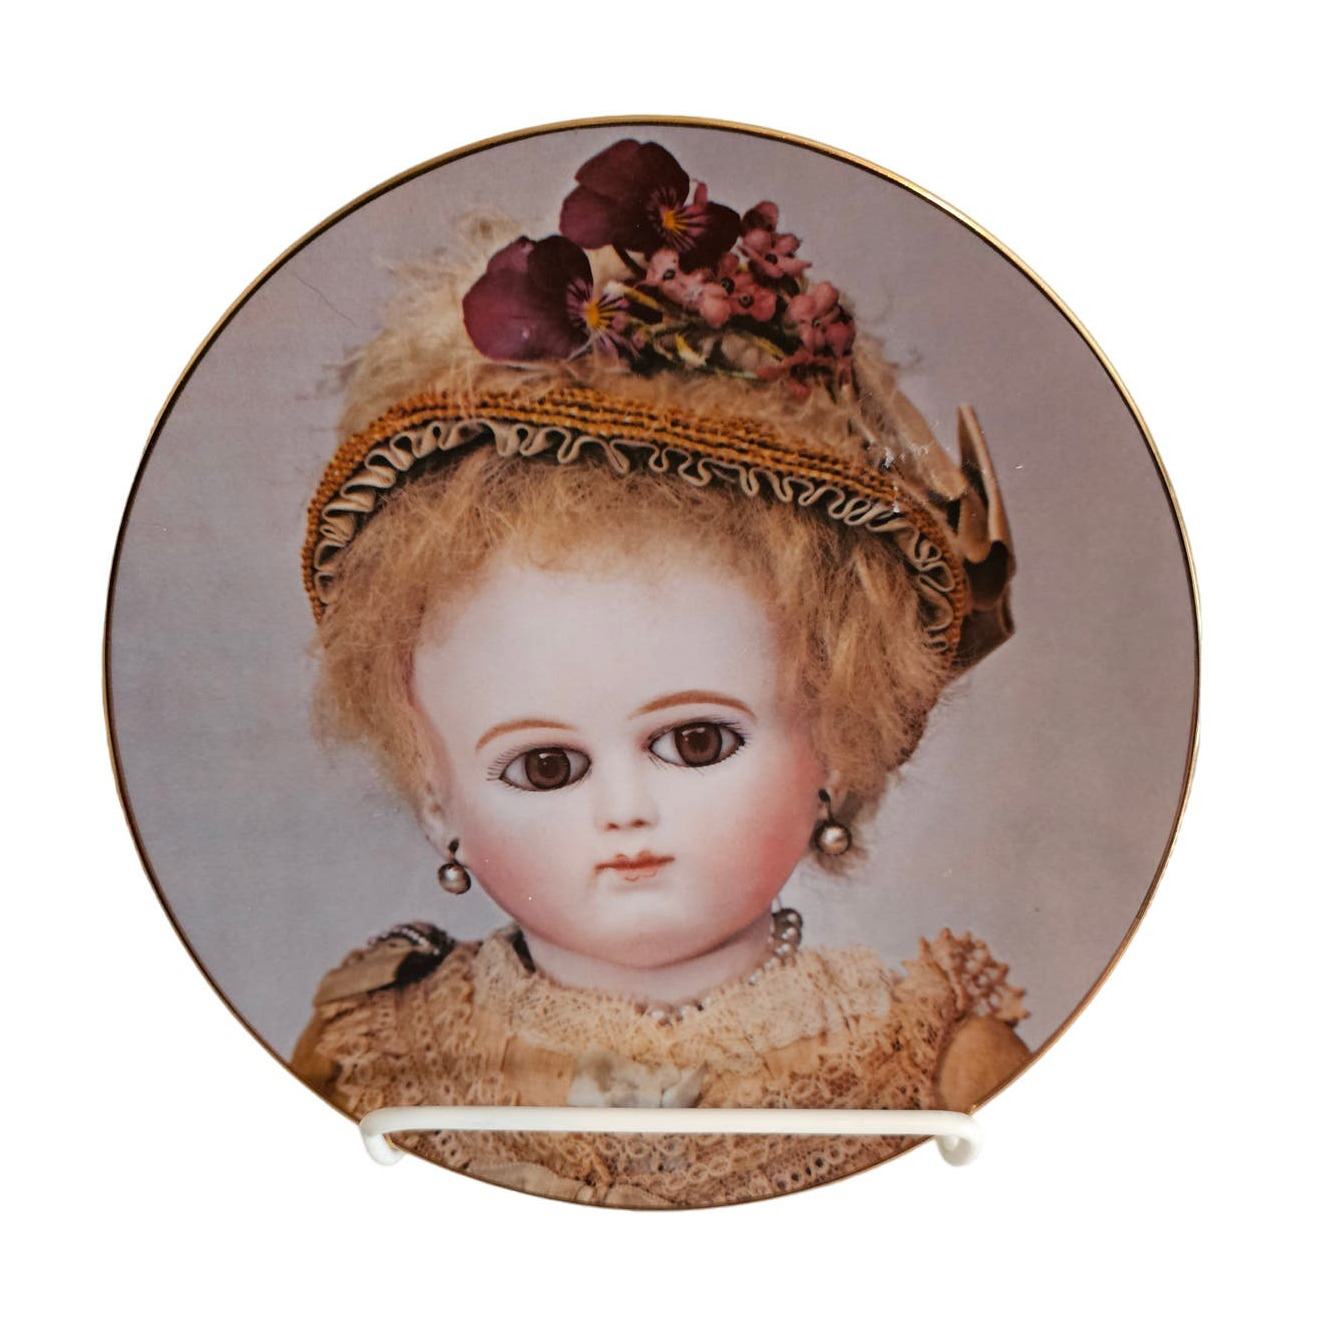 The Doll Collection of Old French Dolls Porcelain Plate Schmitt Numbered Seely